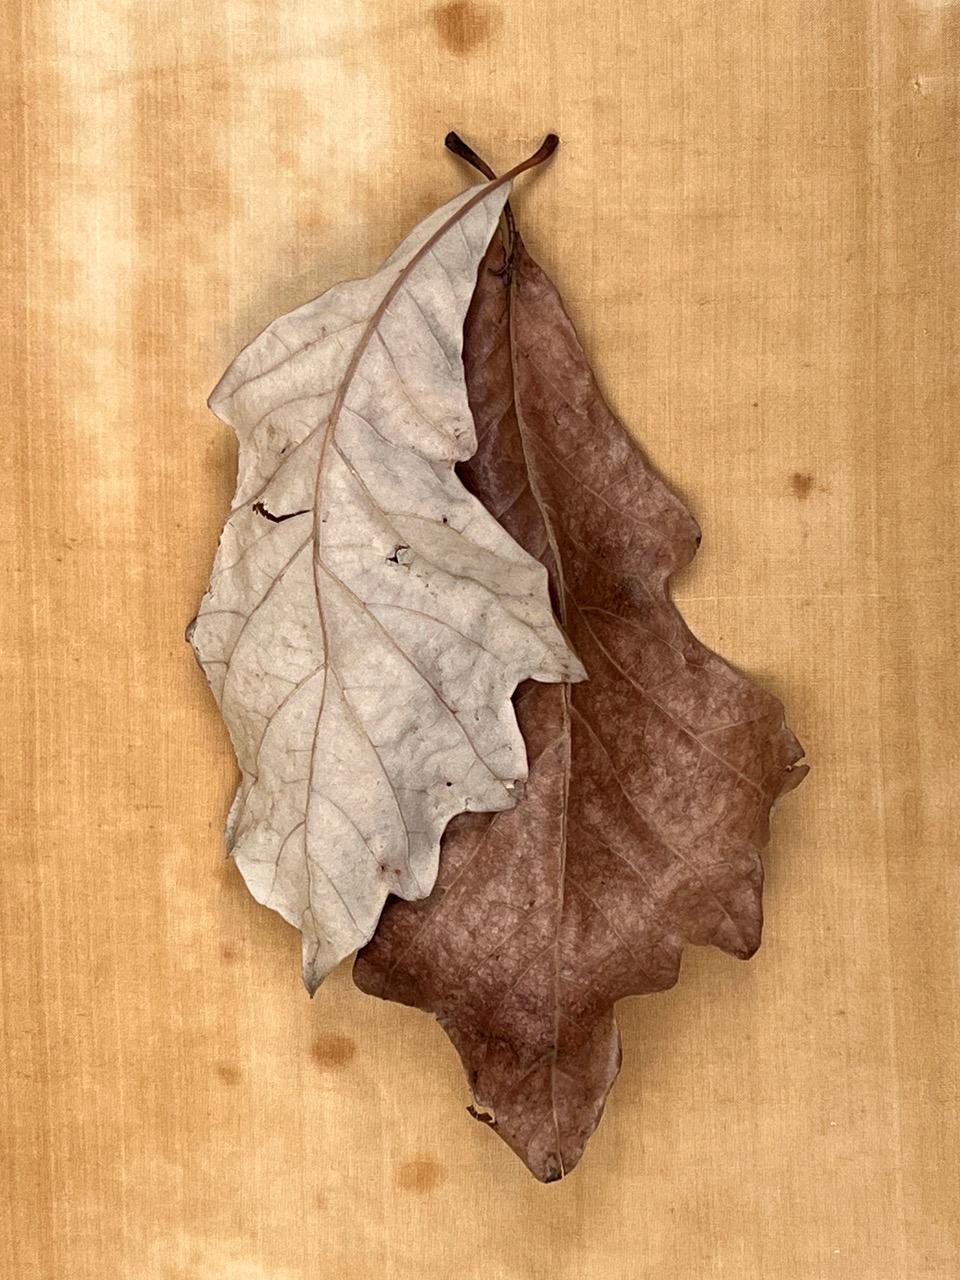 Nine Leaves: grid w/ nature still life leaf photographs in gold, red, green - Realist Photograph by Paul Cava